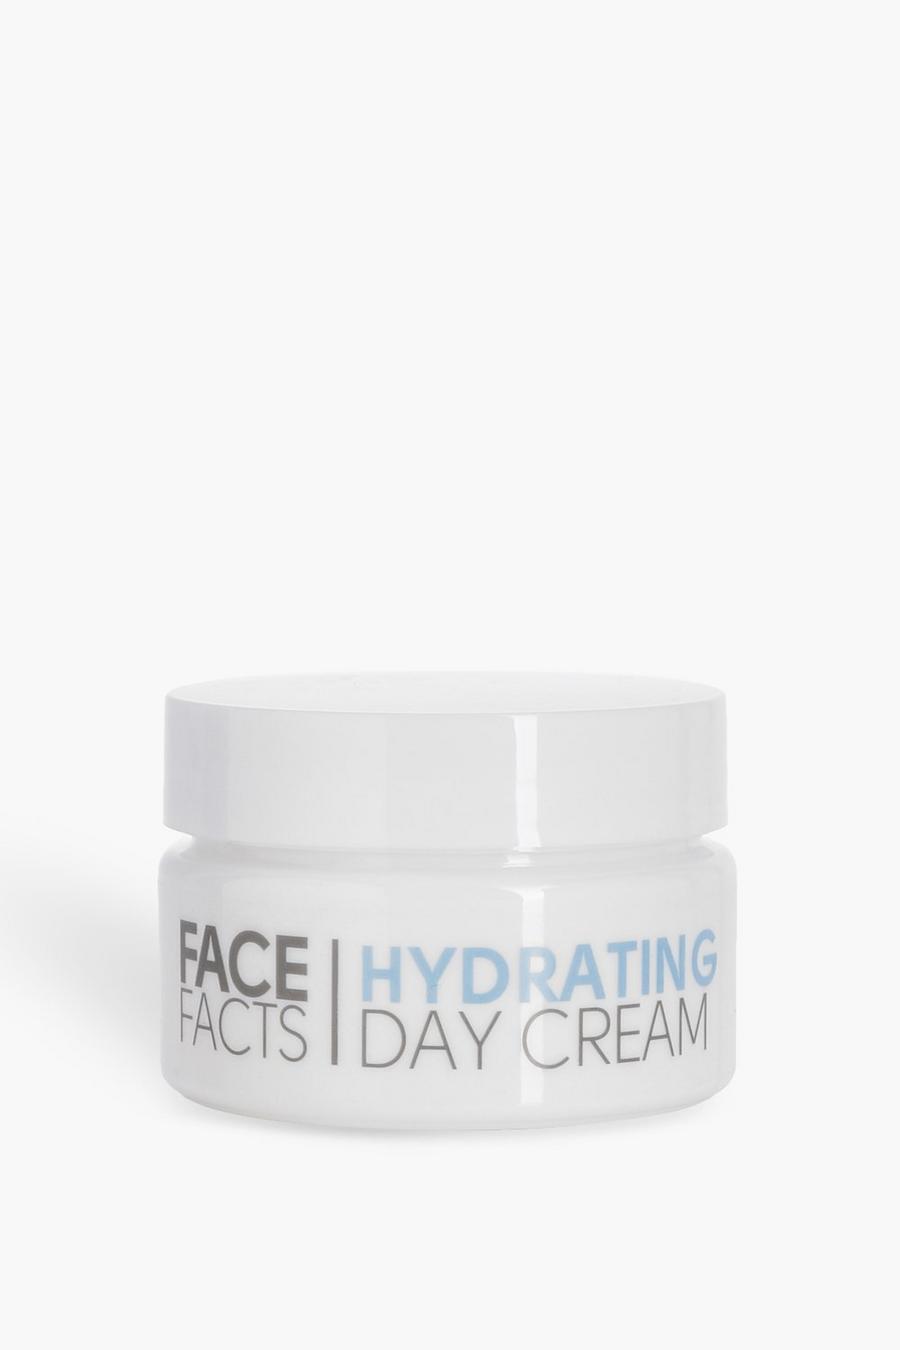 Face Facts Hydrating Day Cream image number 1